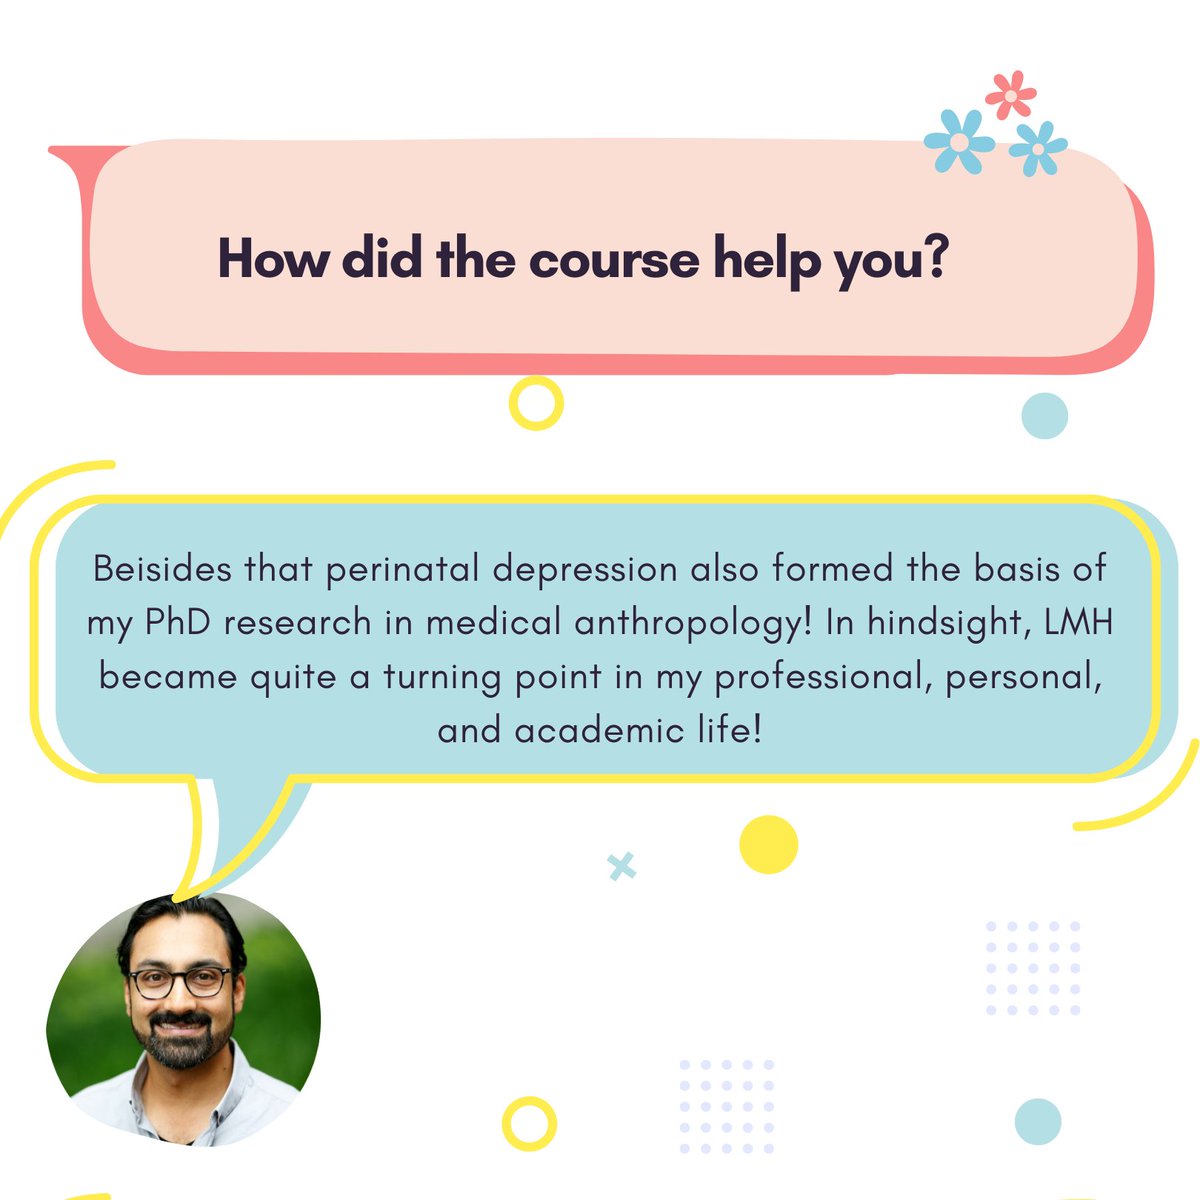 Hear from our alumnus, @aneelbrar, on how Leadership in Mental Health course became quite a turning point in his professional, personal, & academic life. Here's your chance to learn about innovations in #Mentalhealth or exploring a career in research & implementation!